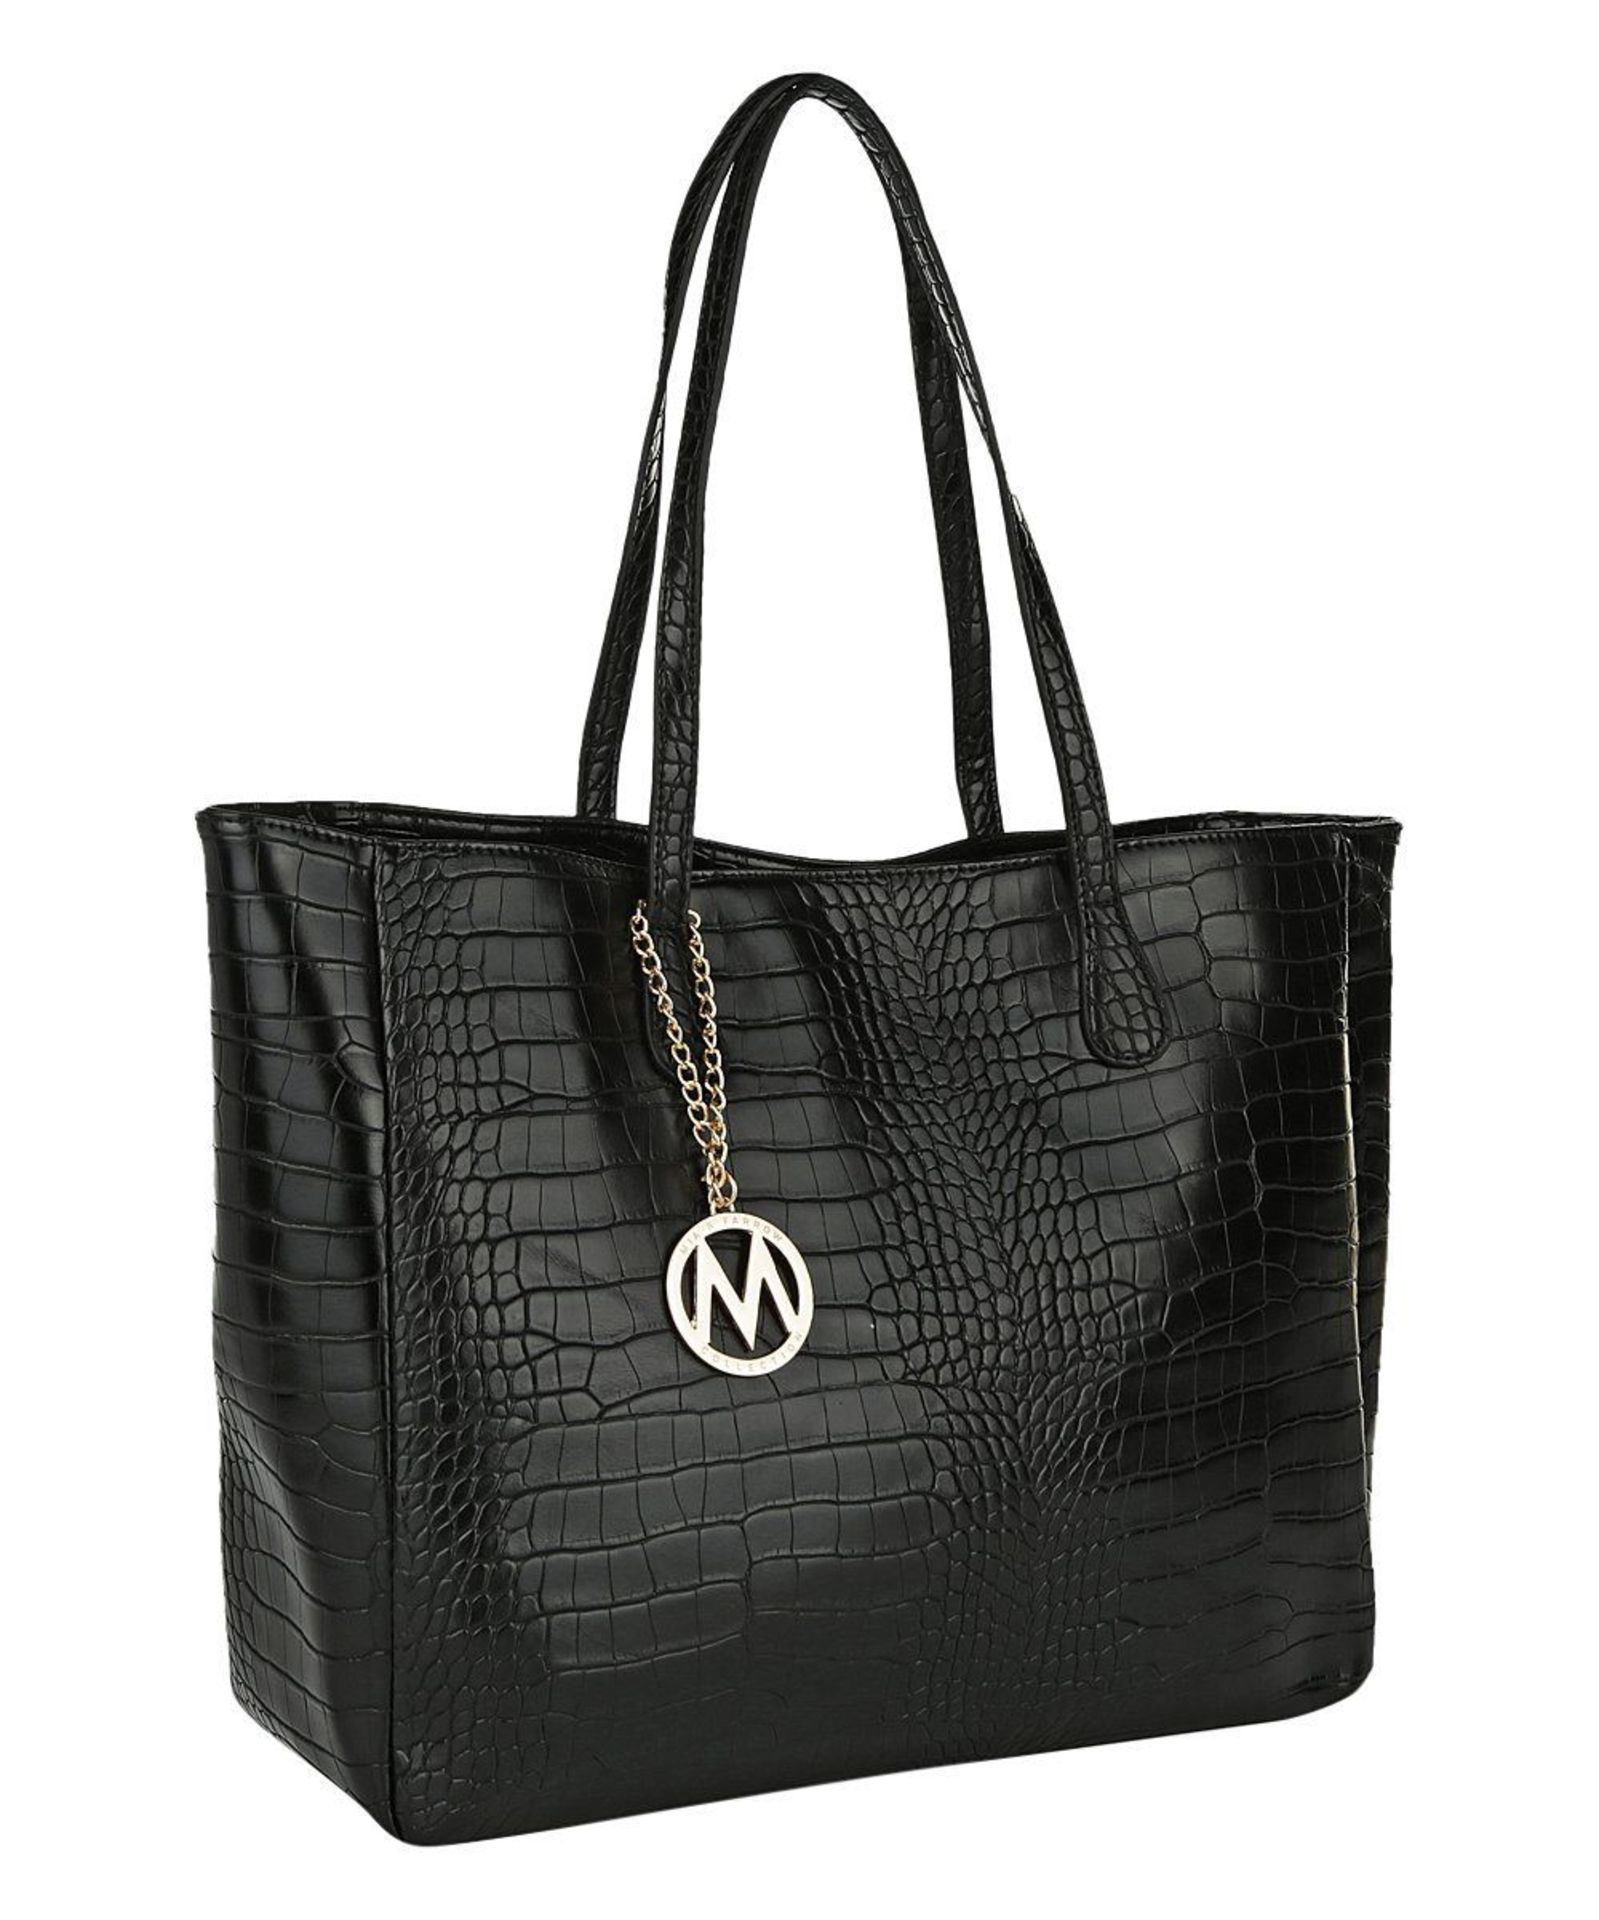 Mkf Collection By Mia K. Farrow Black Croc-Embossed Tote (New With Tags) [Ref: 51353346-Mi-Tub 1]-